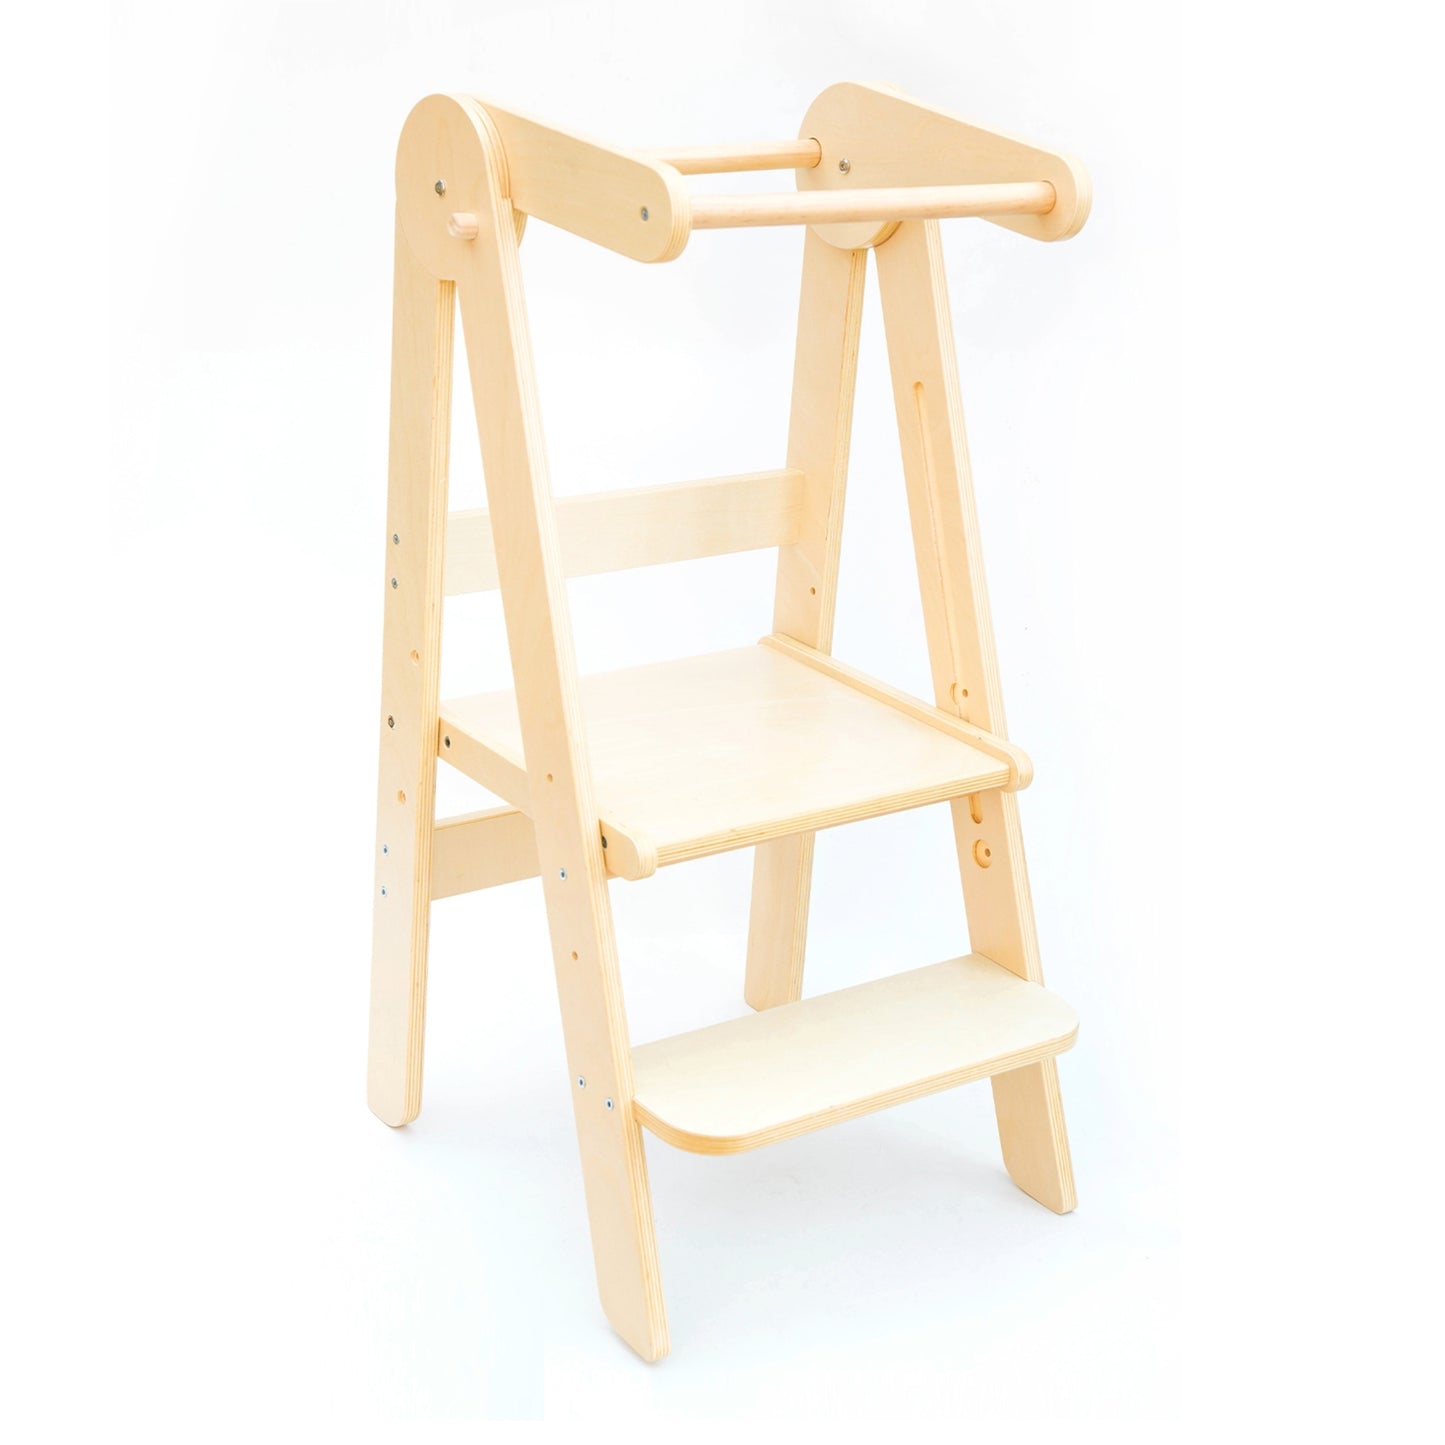 Front view of the Natural Adjustable Foldable Learning Tower displaying the adjustable platforms on a white background.